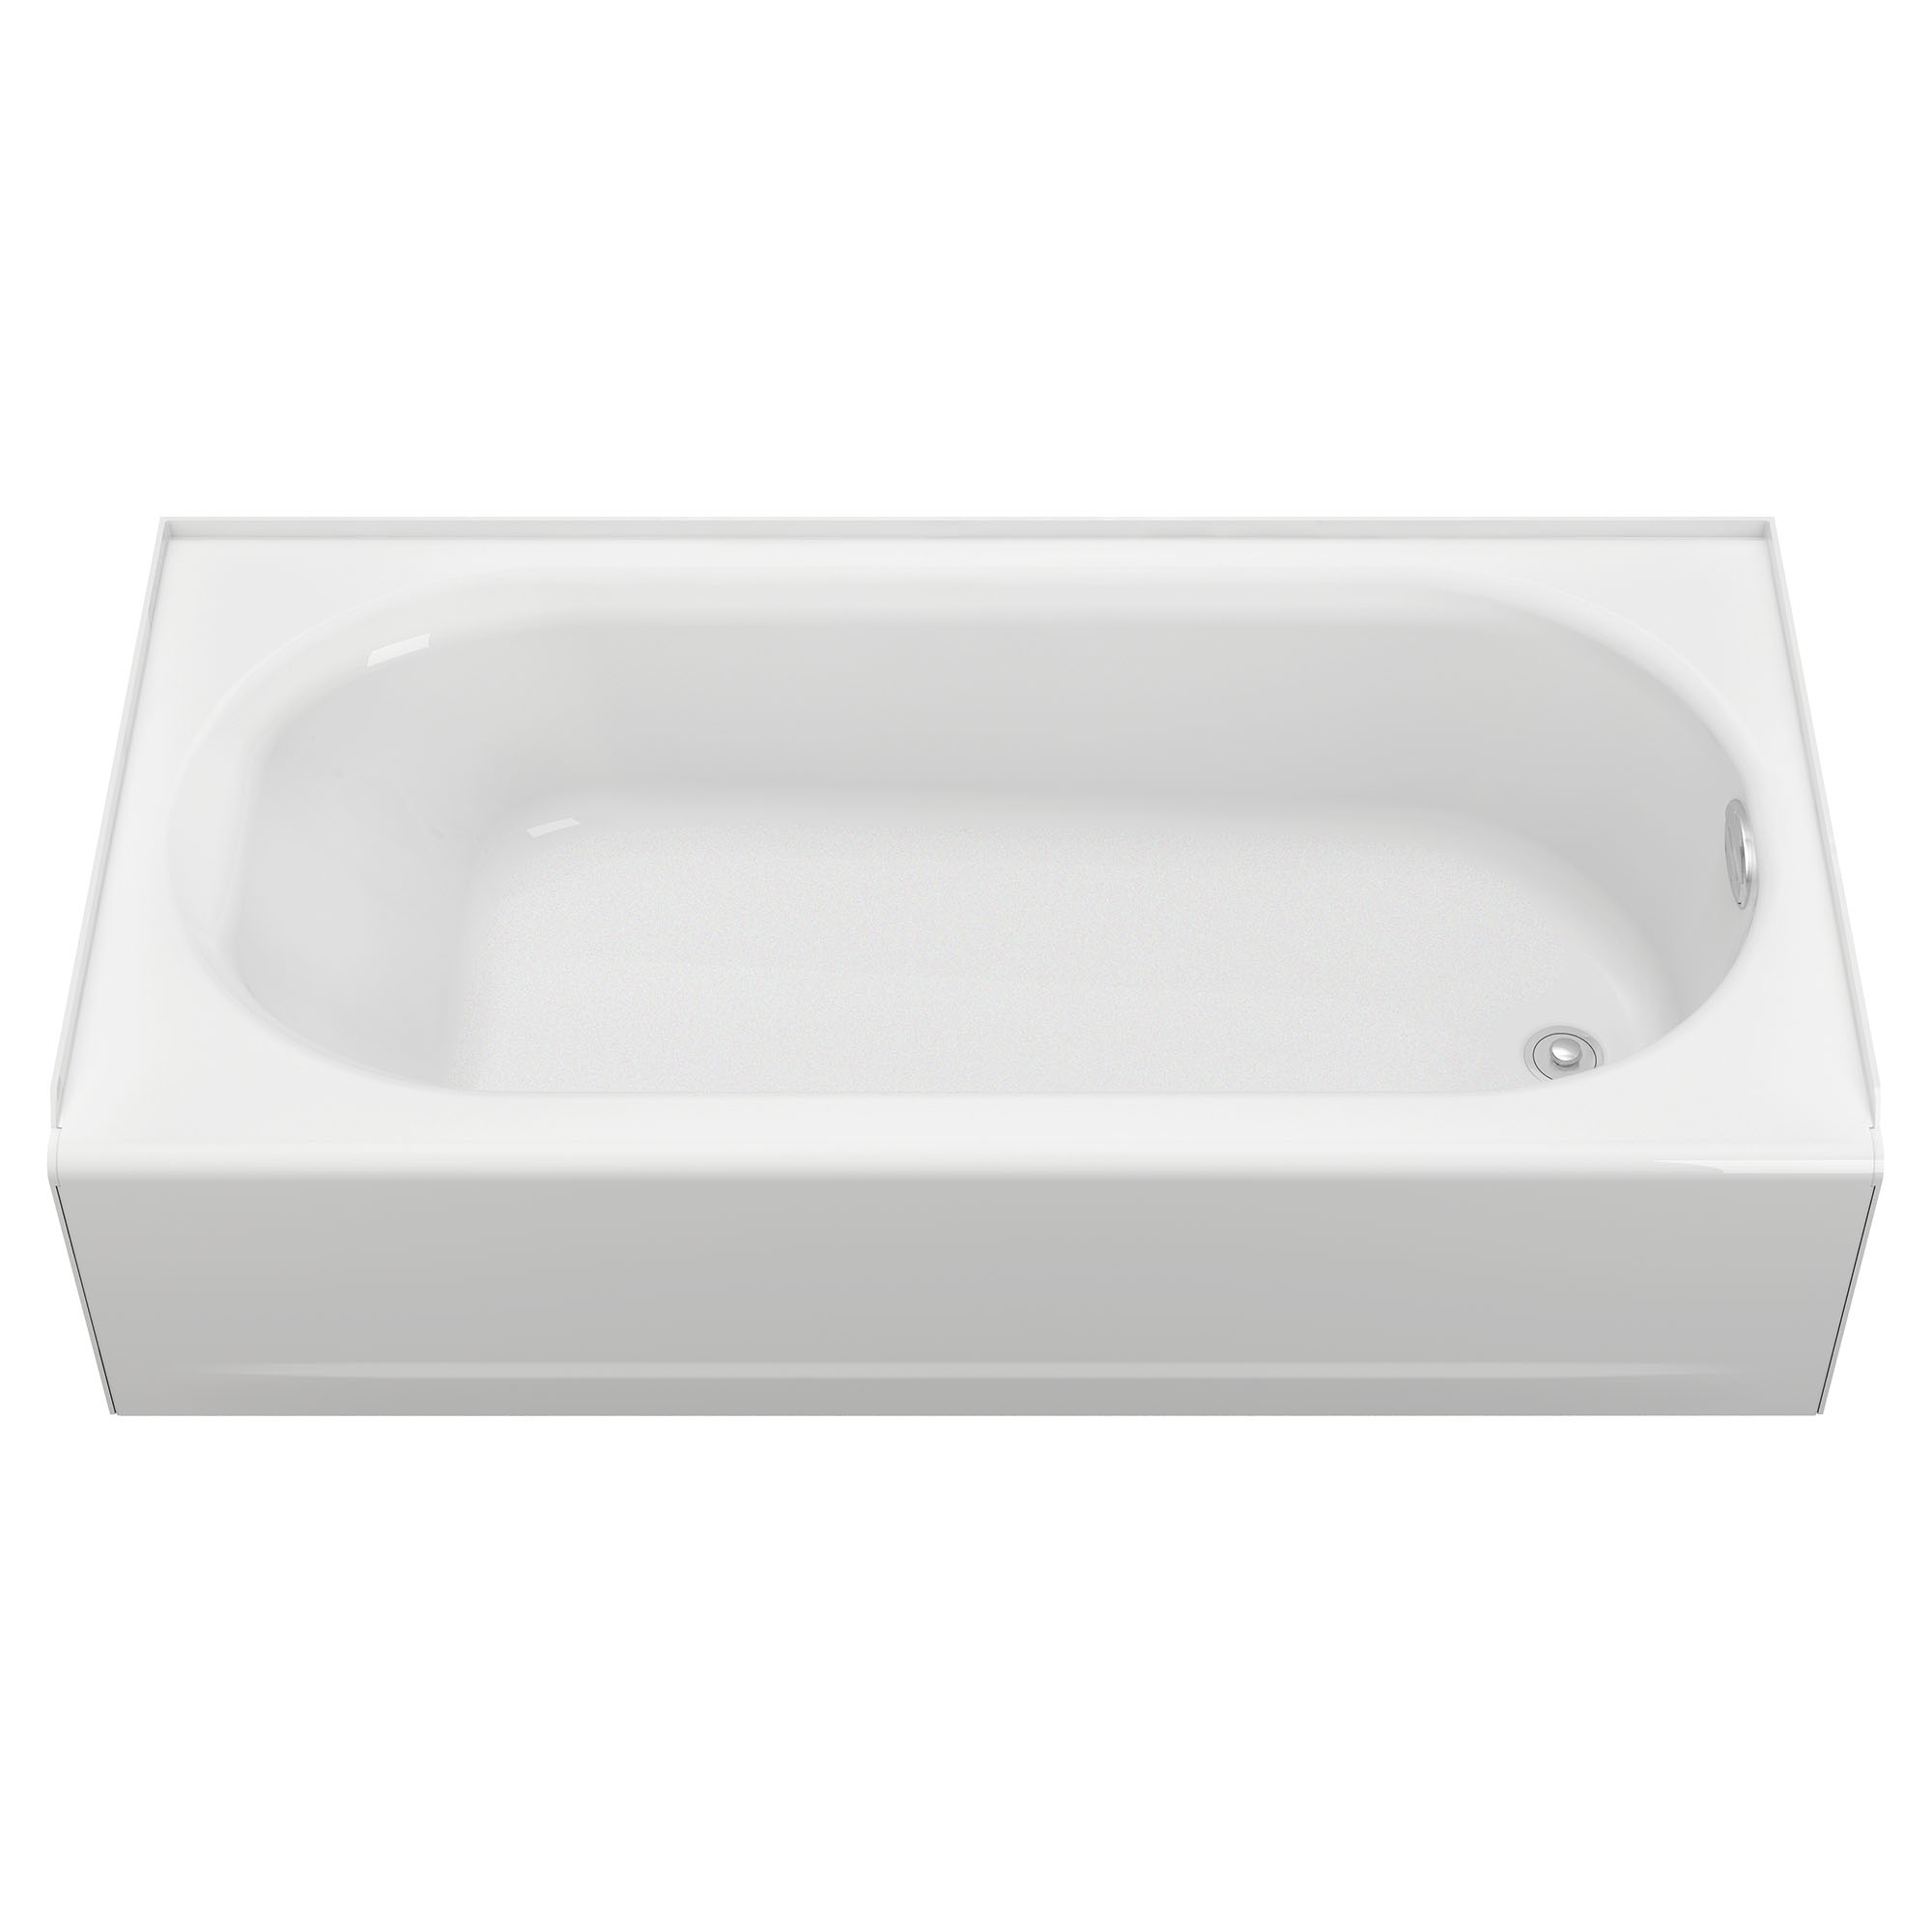 Princeton® Americast® 60 x 30-Inch Integral Apron Bathtub Right-Hand Outlet With Integral Drain